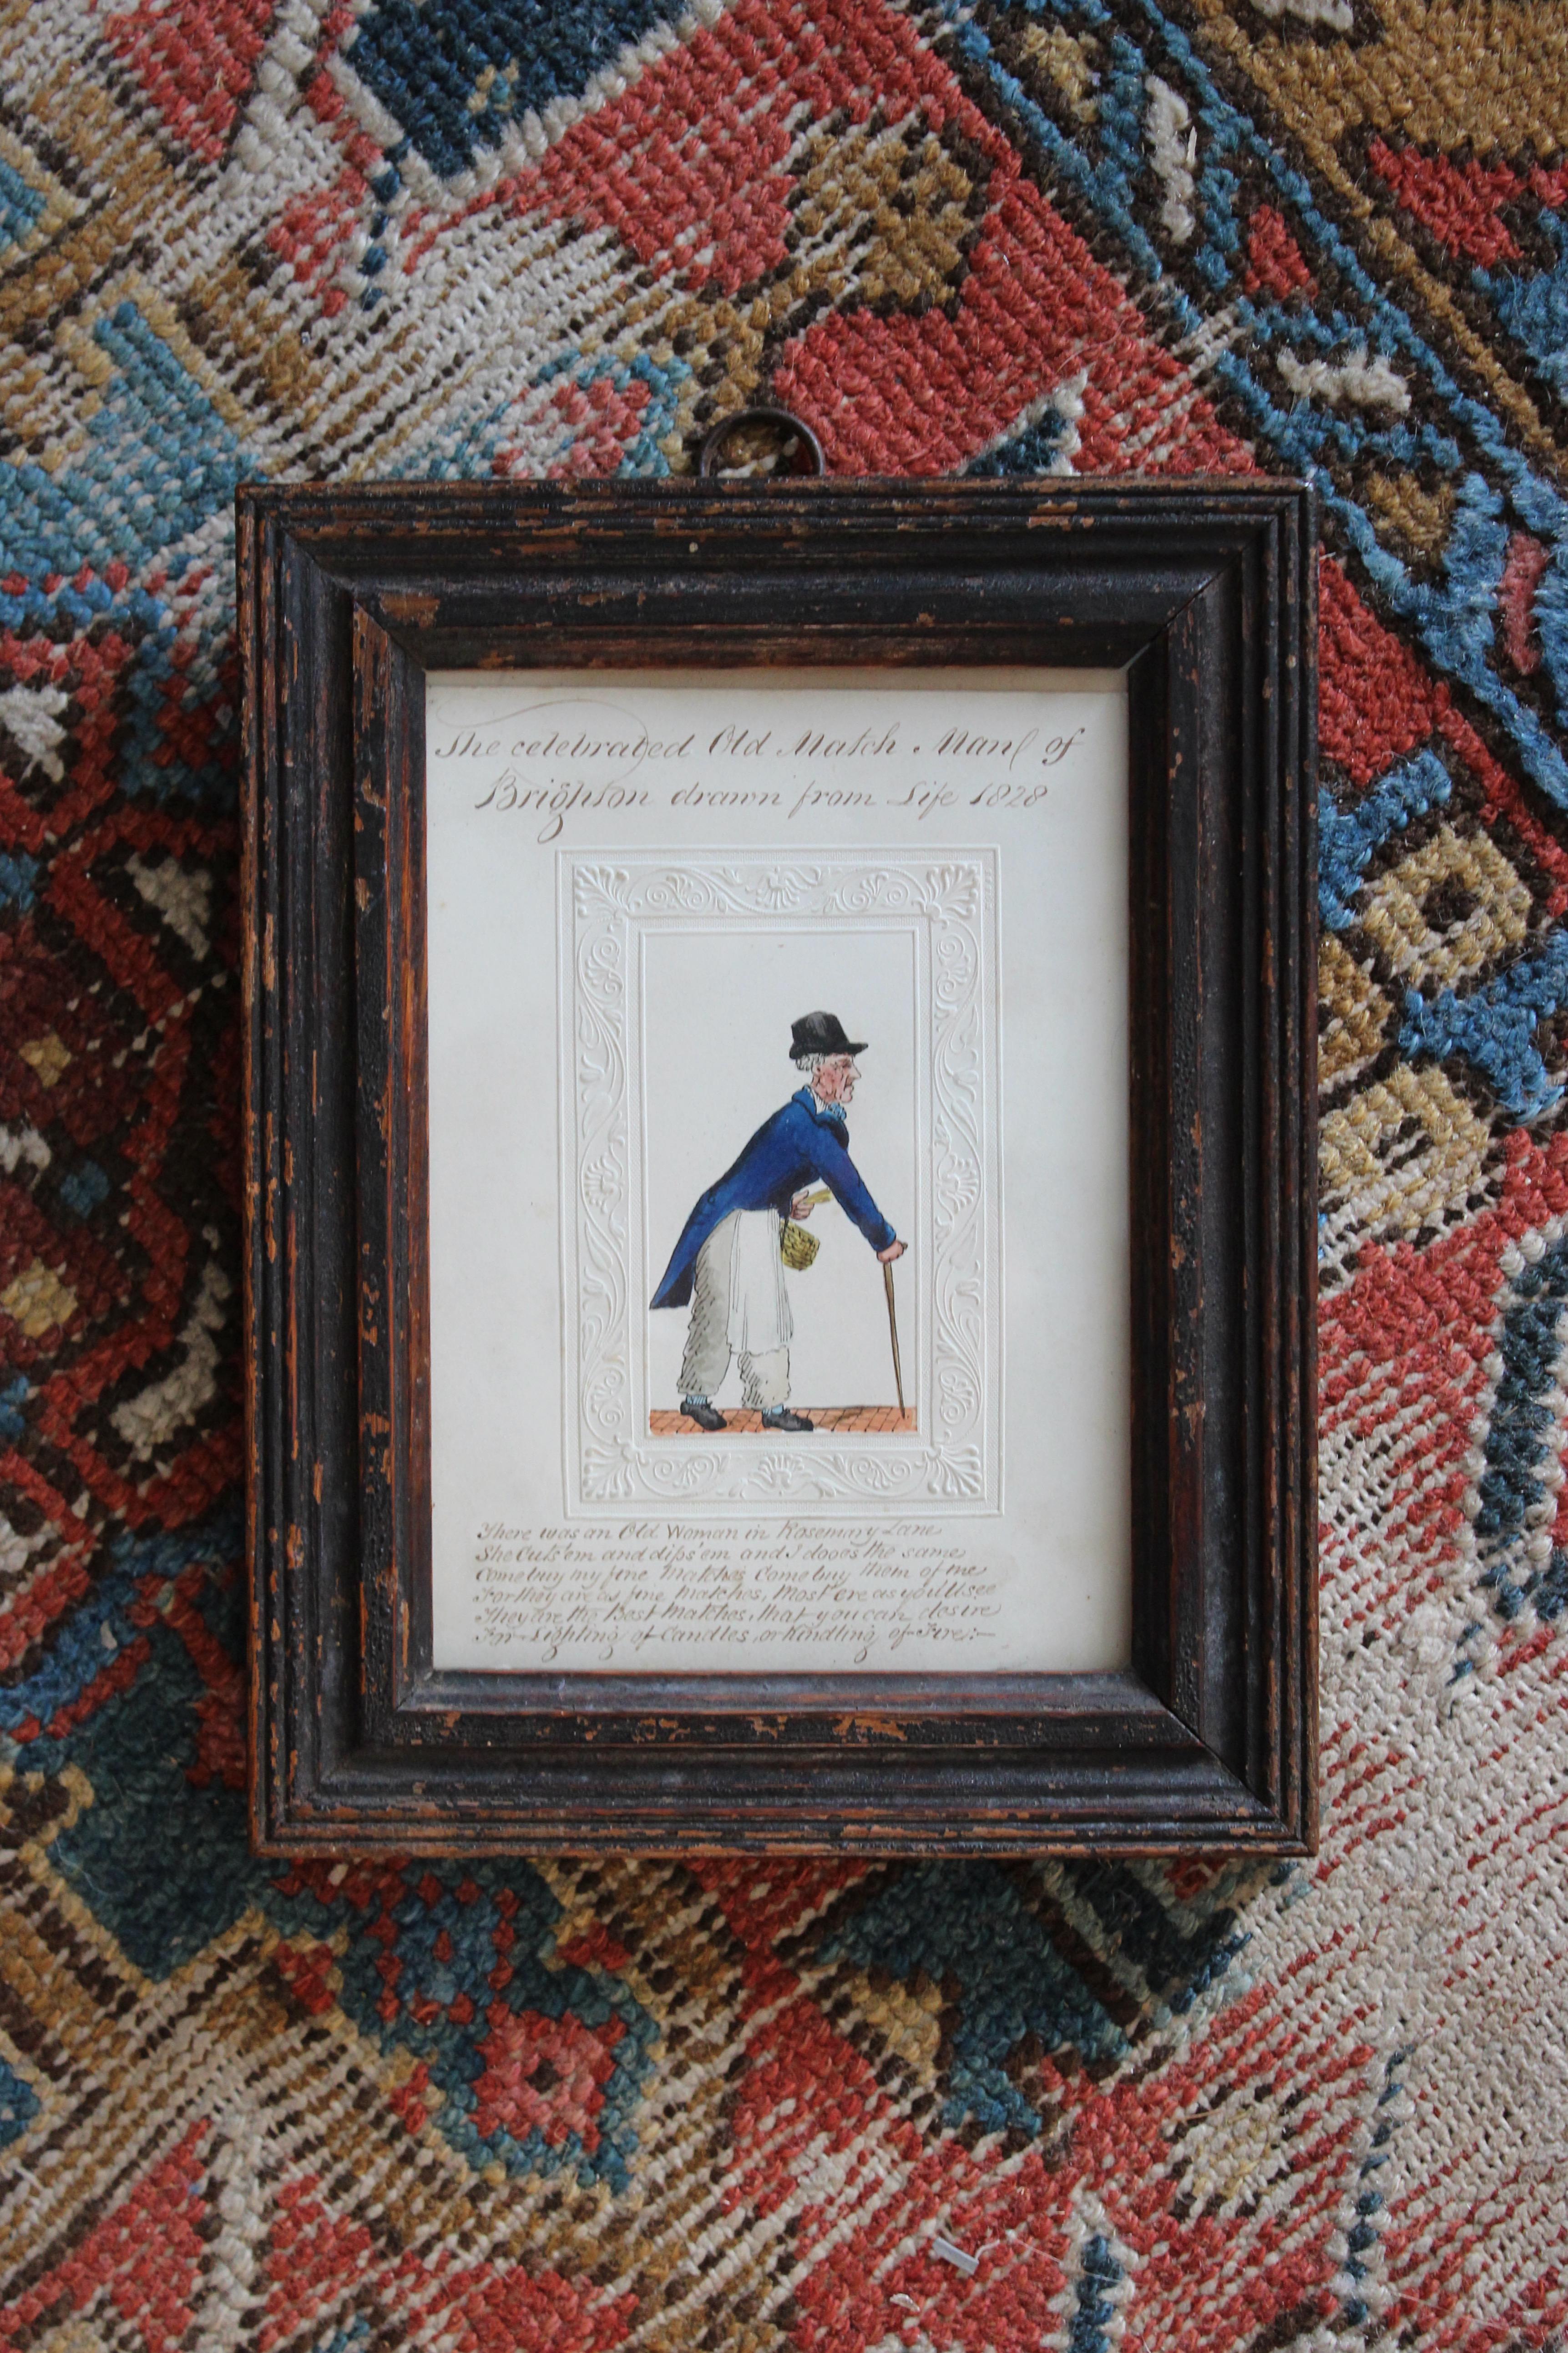 A wonderful folk art hand penned and coloured portrait of the Brighton Match Maker 1828. 

Housed in its original frame with a decorative perforated border and wee verse that reads 

“There was an Old Woman in Rosemary Lane
She cuts 'em and dips 'em